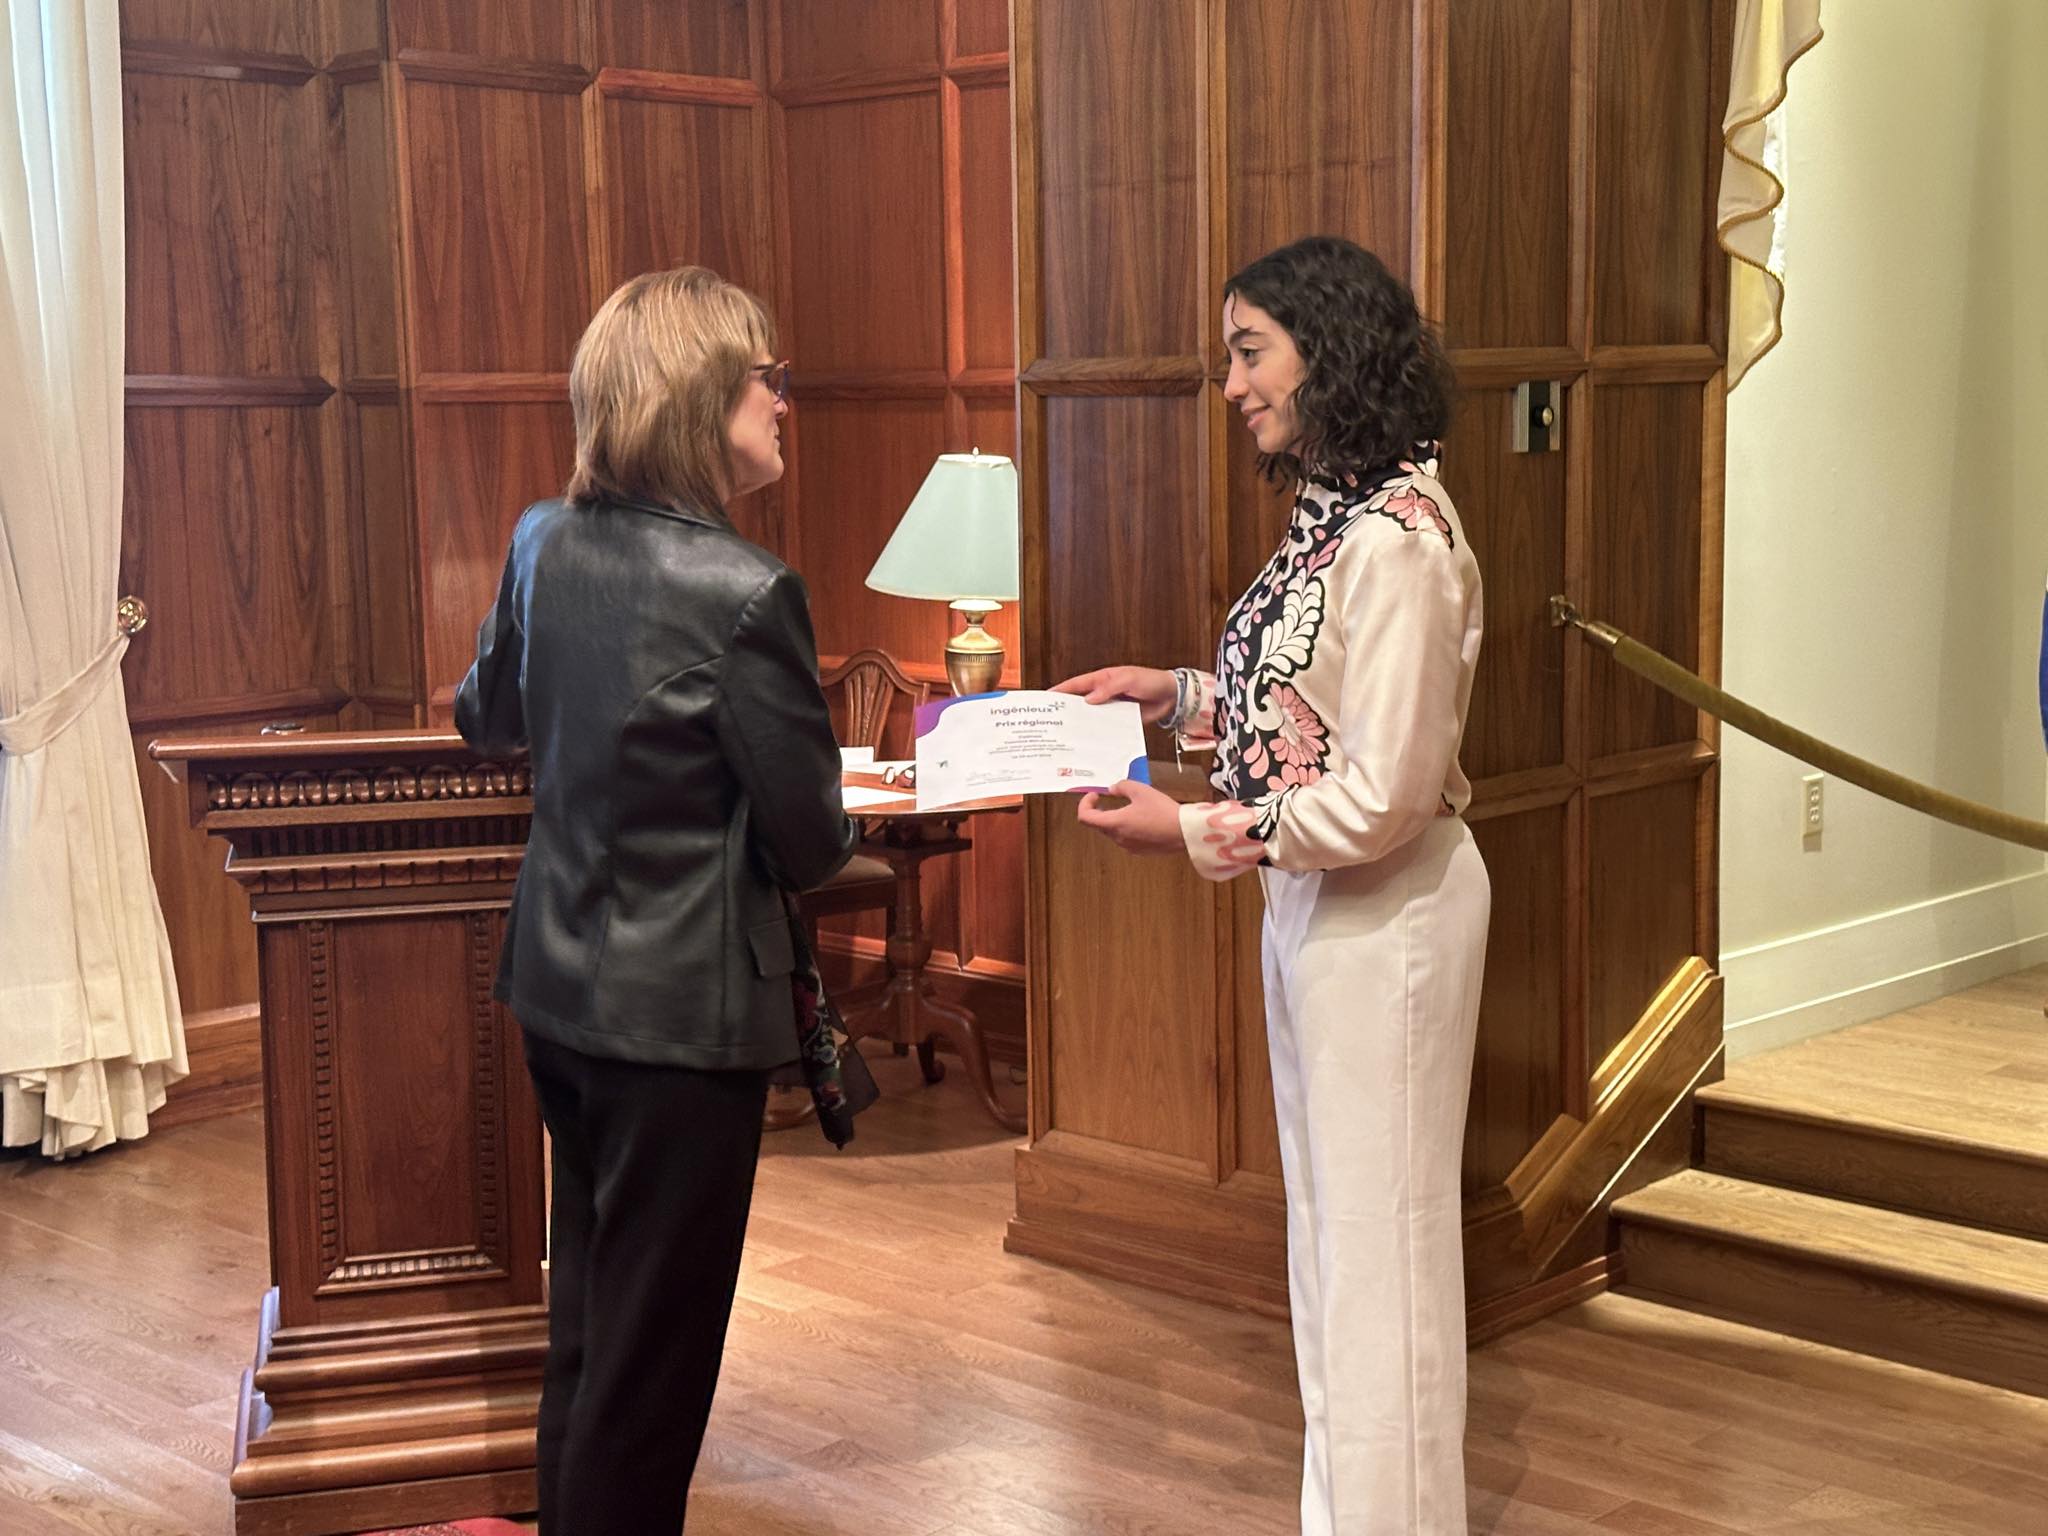 Miss Yasmine Ben Arous rewarded at the Lieutenant Governor's Cabinet with the Ingénieux+ scholarship

